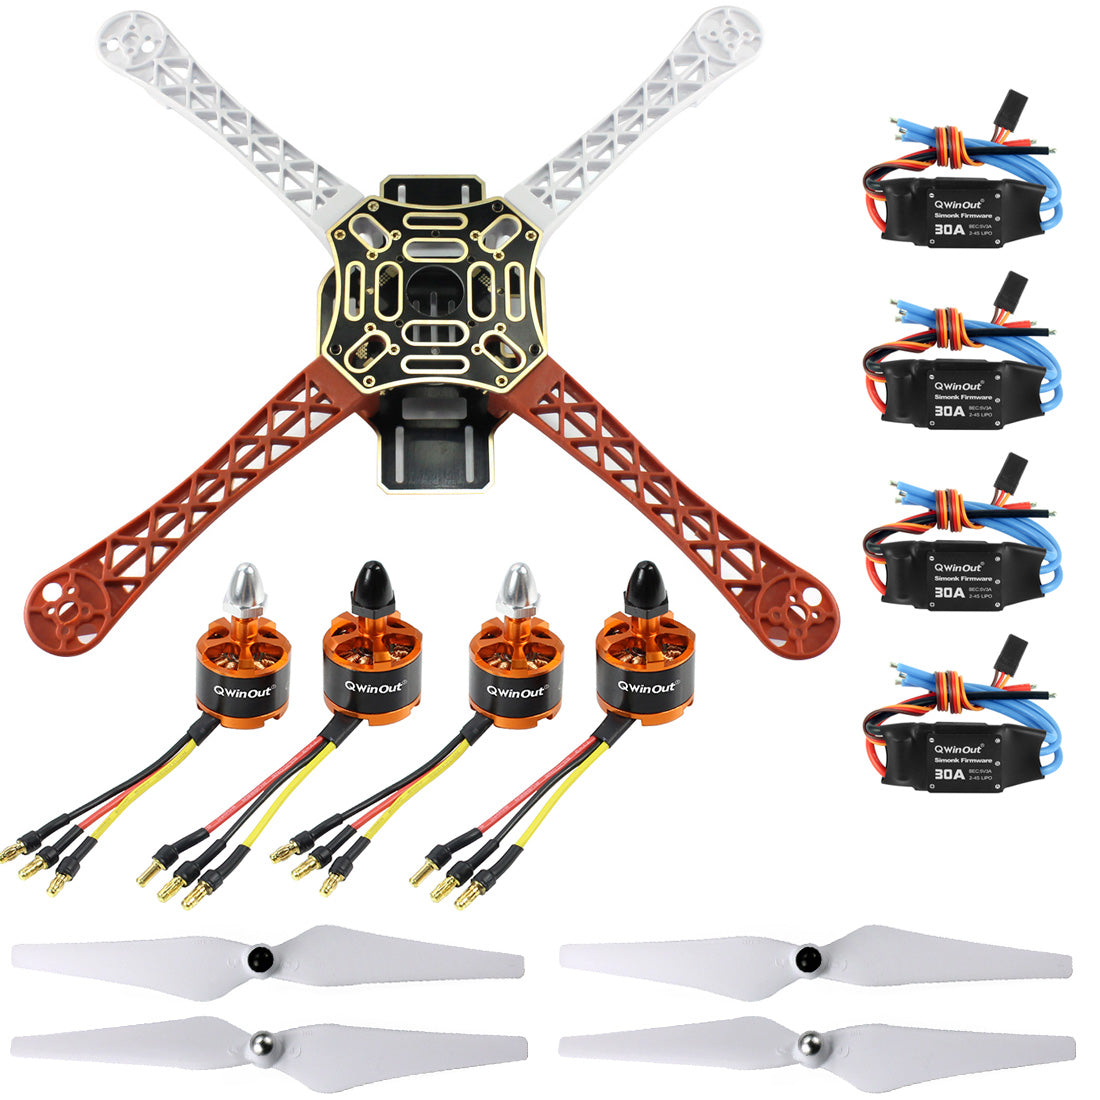 QWinOut DIY FPV Drone Quadcopter 4-axle Aircraft Kit :F450 450 Frame